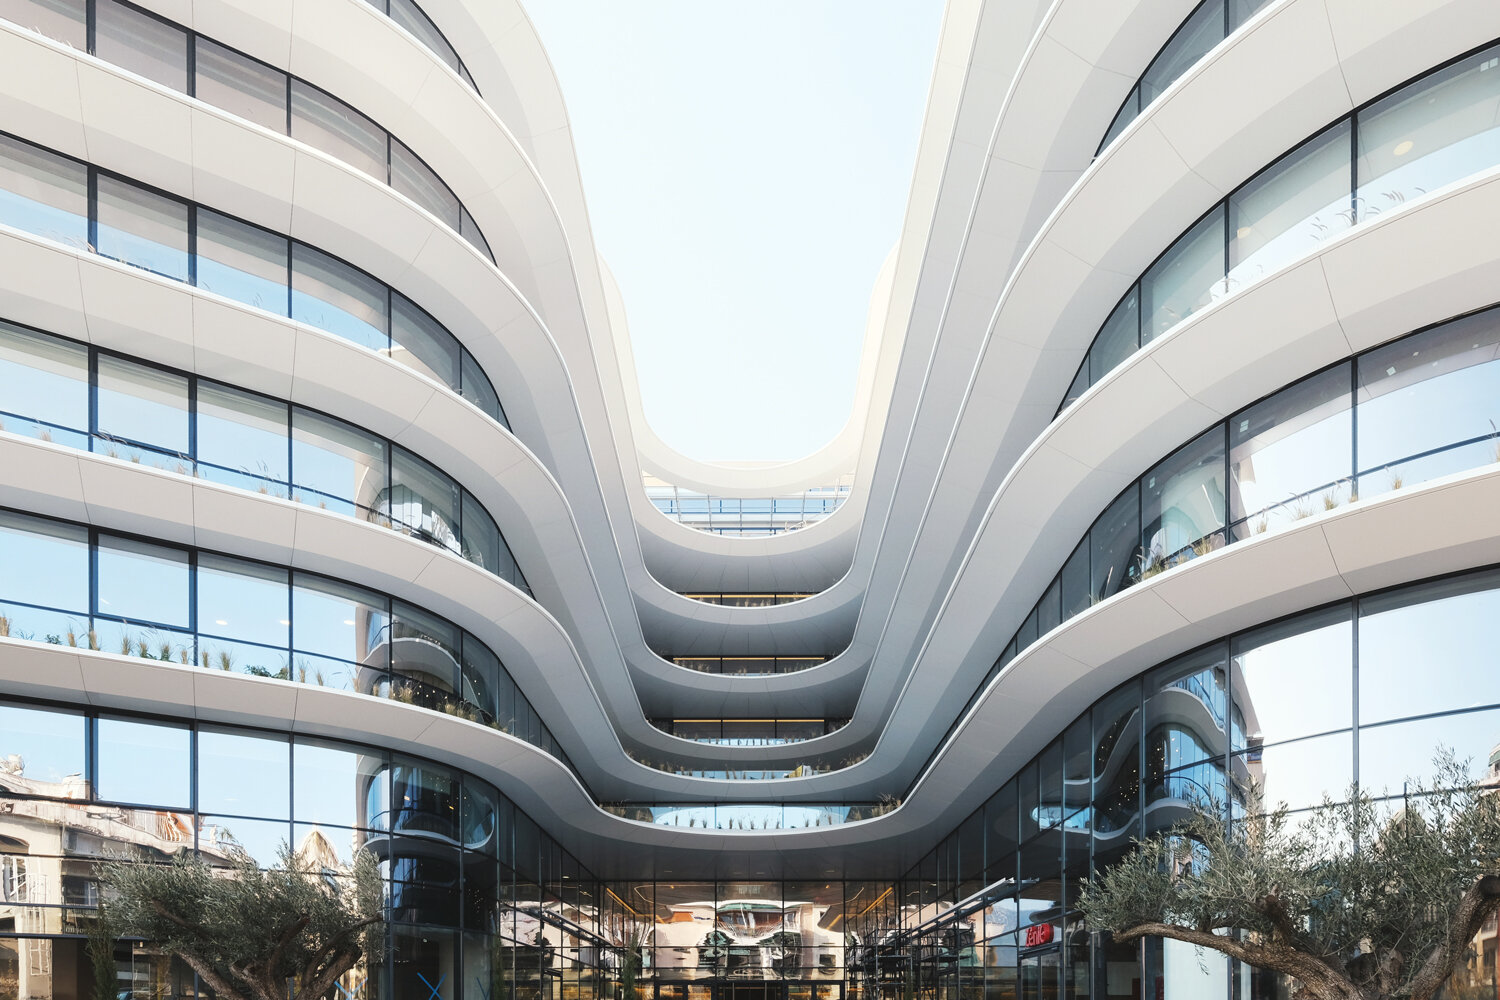  The Orbit, office building by LC Architects, photoshoot for  Athens Voice  